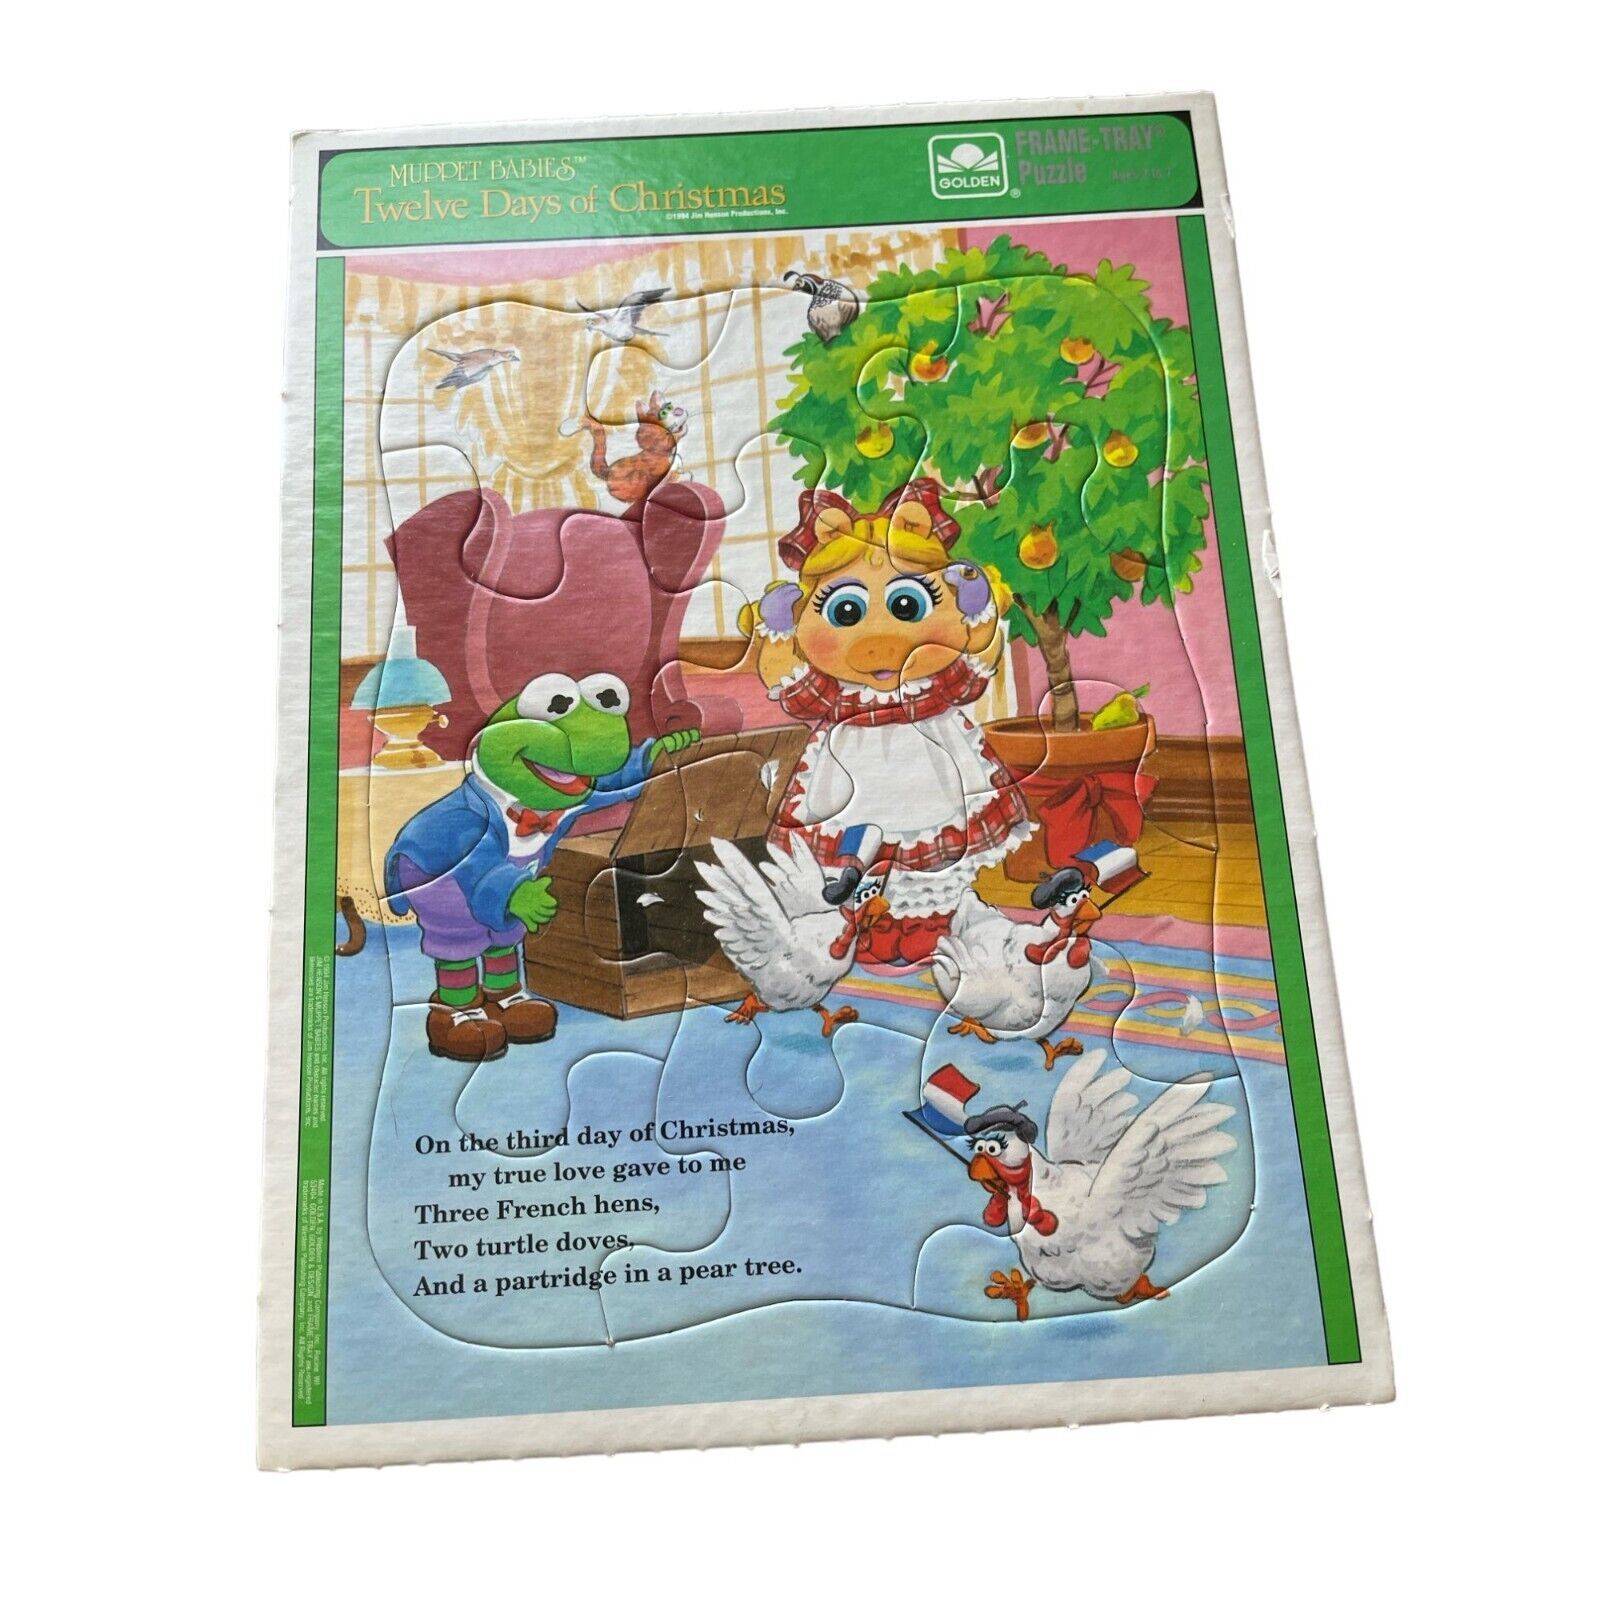 1994 Golden Frame Tray Puzzle Muppet Babies Twelve Days of Christmas - $13.00